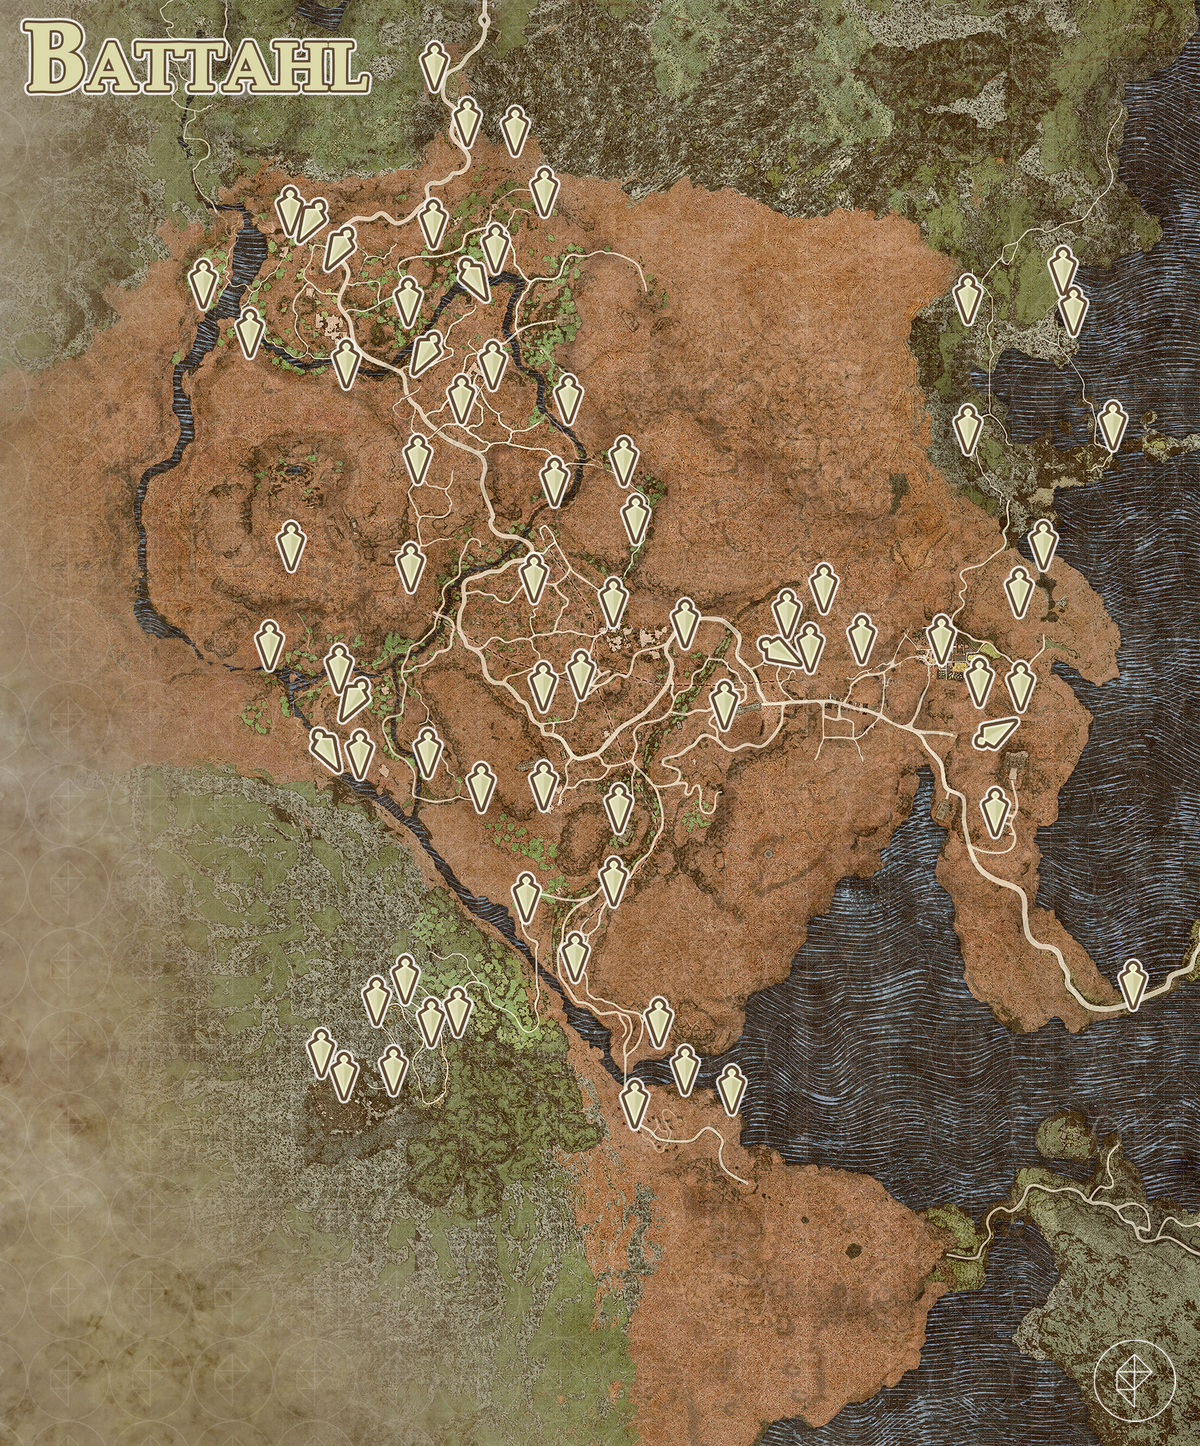 Dragon’s Dogma 2 map showing the location of every Seeker’s Token in Battahl